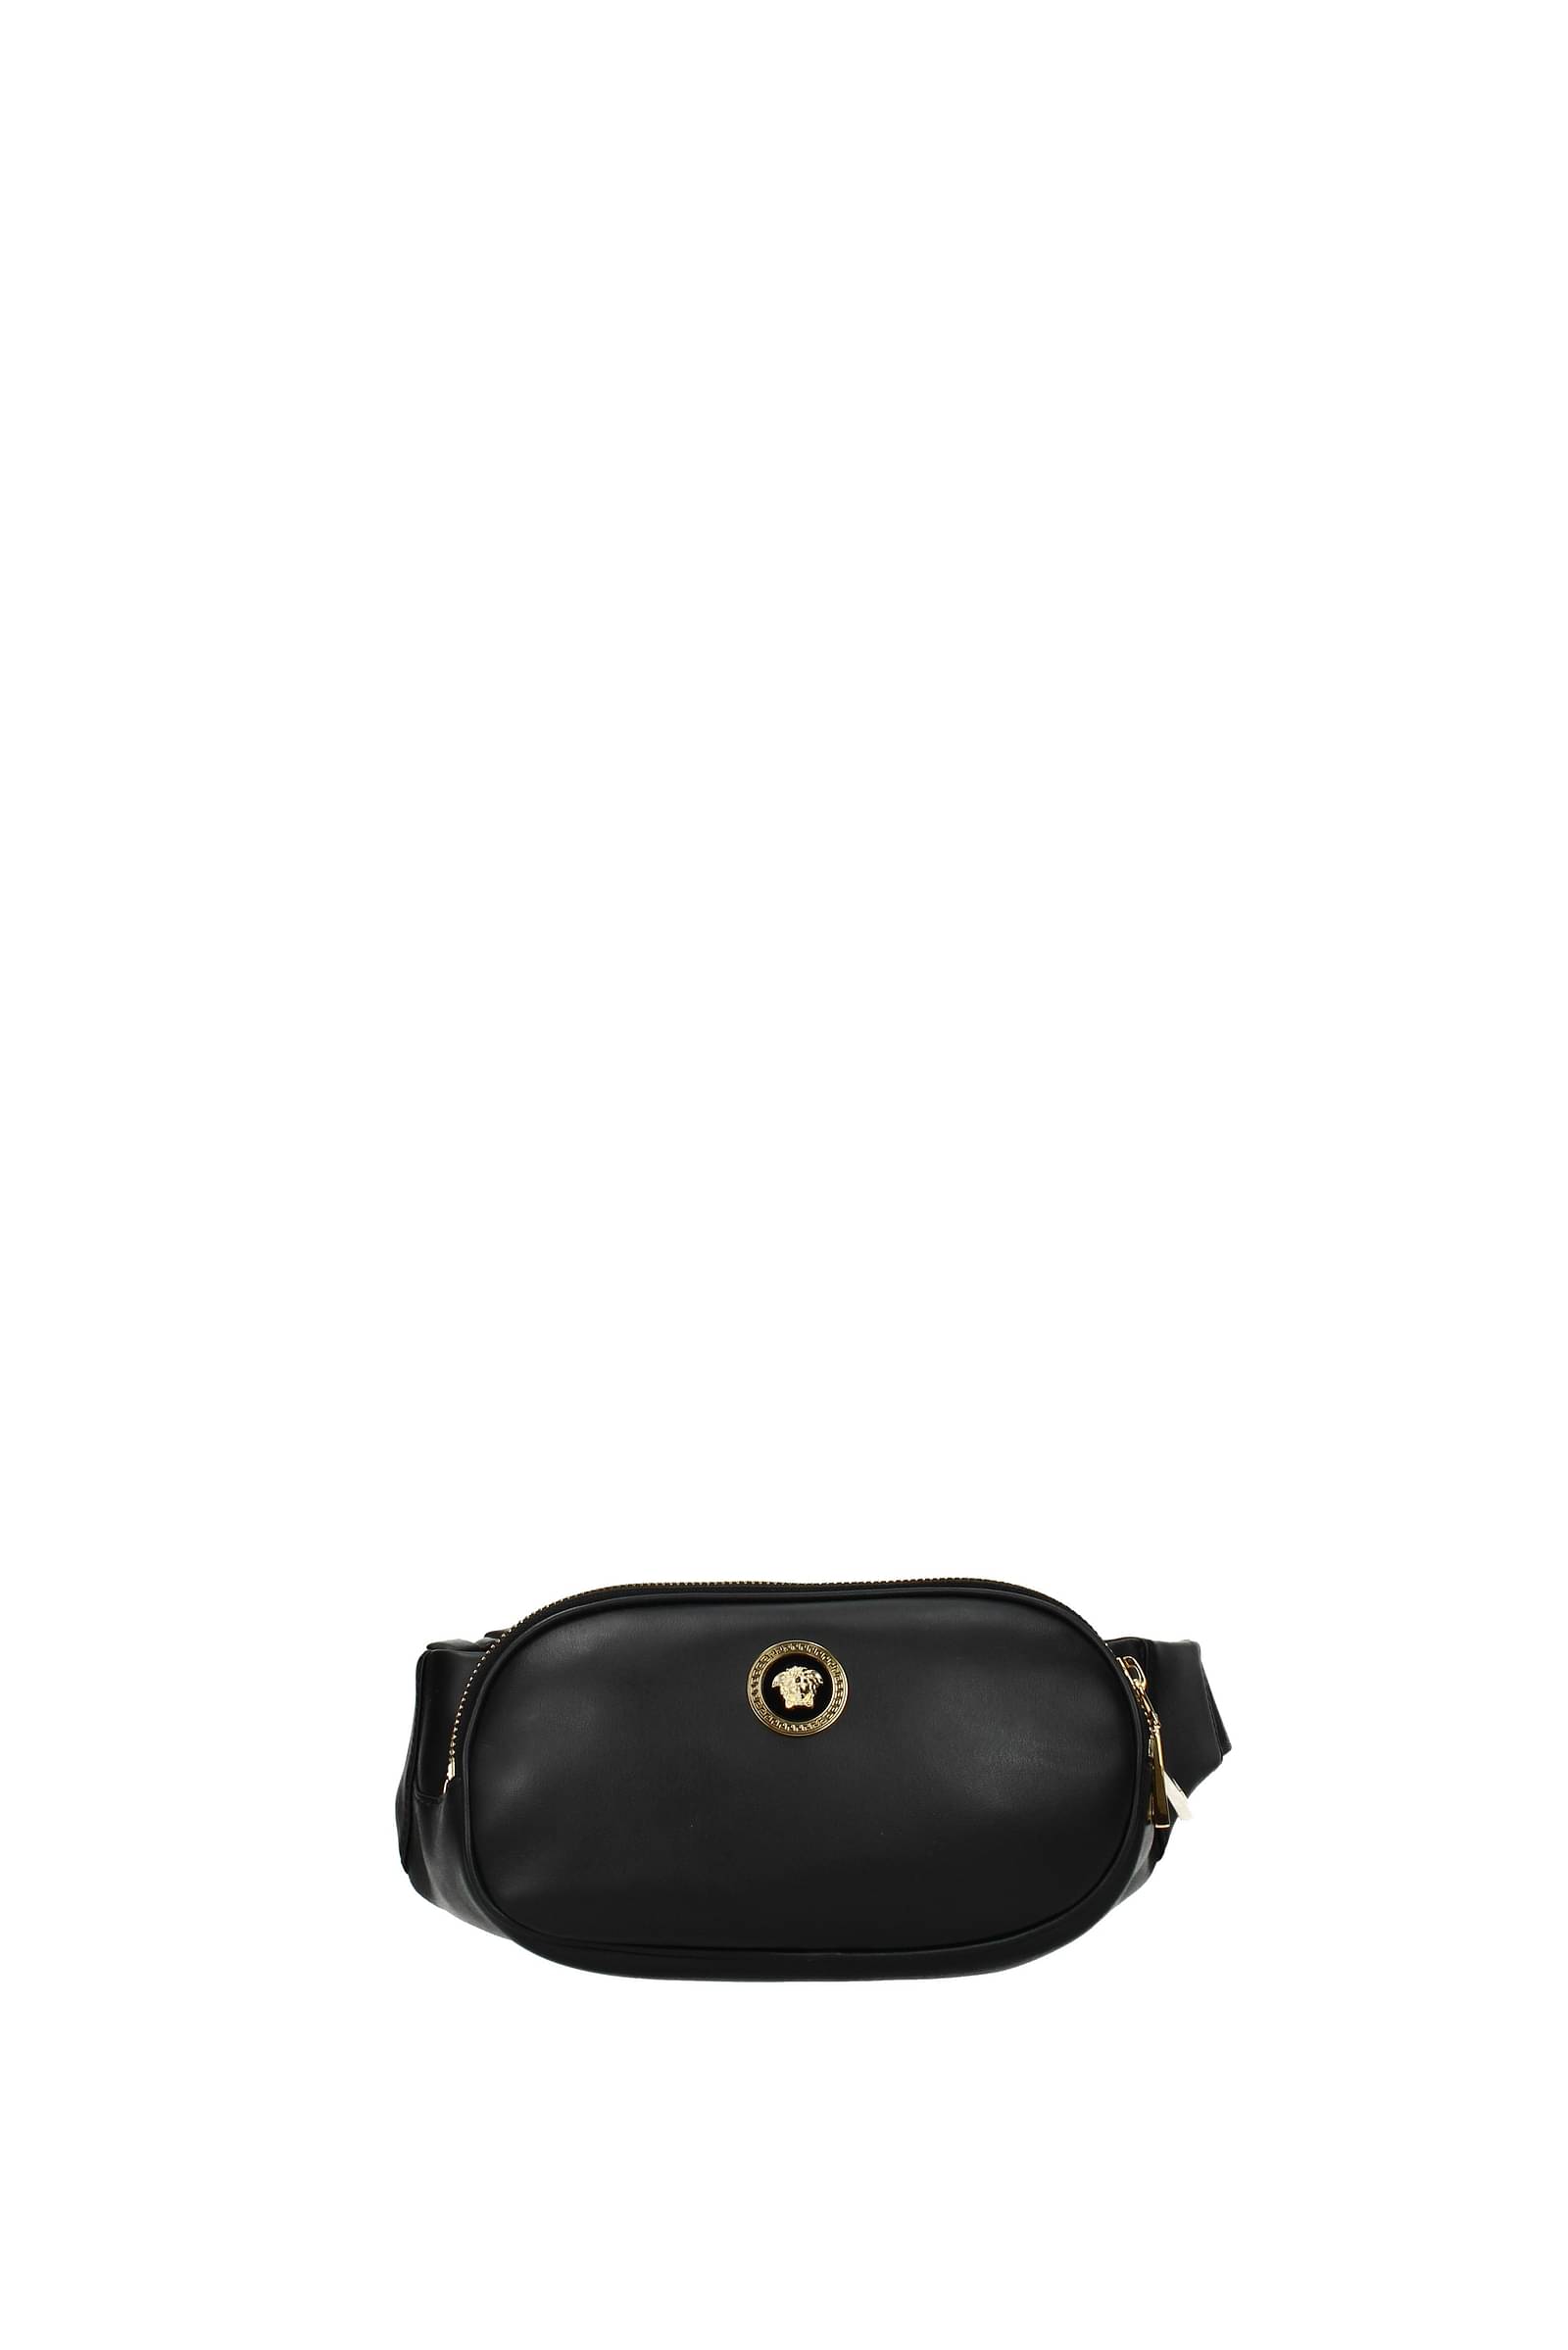 versace outlet online